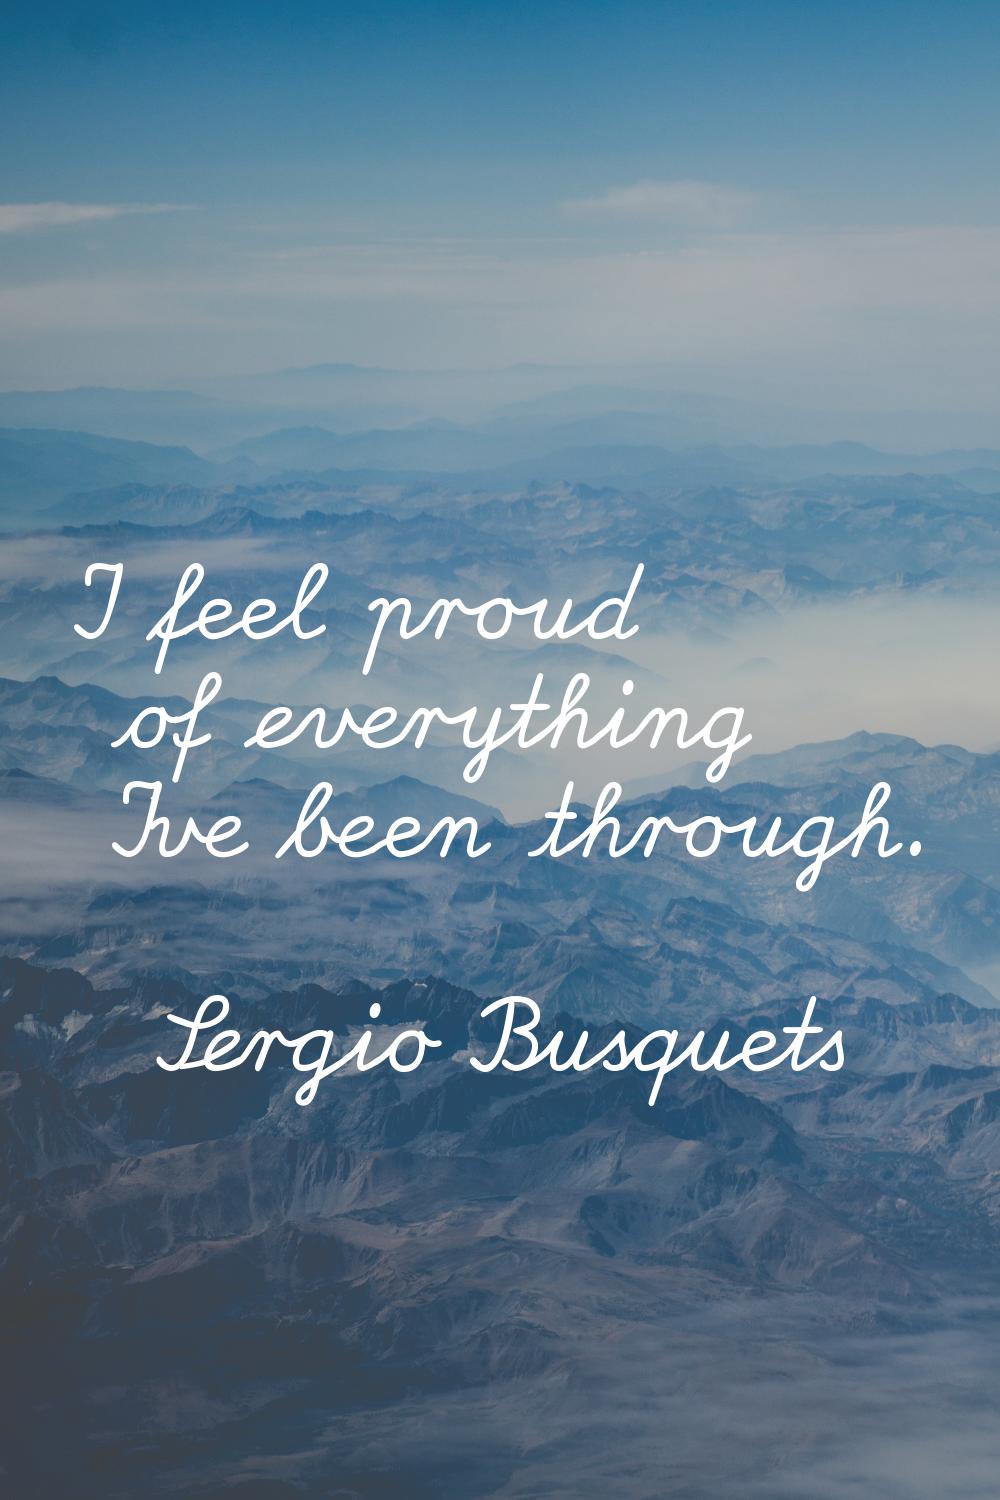 I feel proud of everything I've been through.